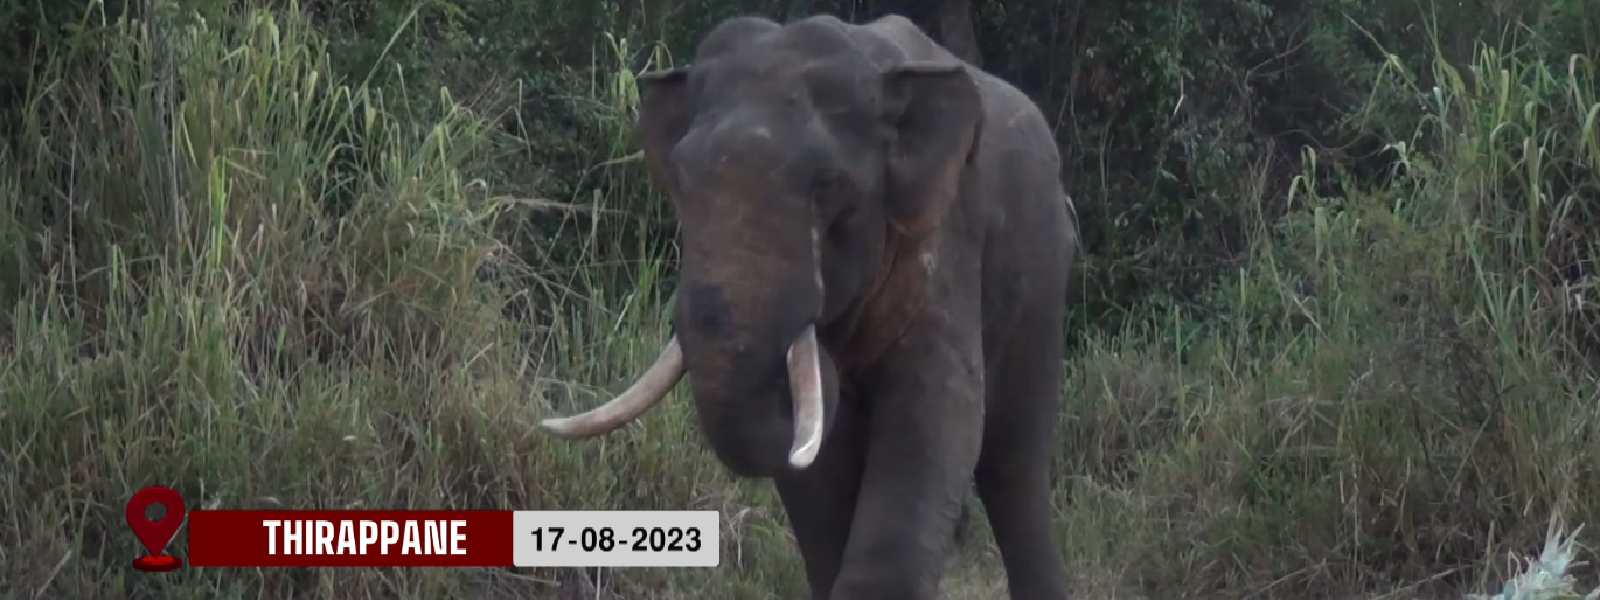 Electric Fence to Contain 'Agbo' Elephant